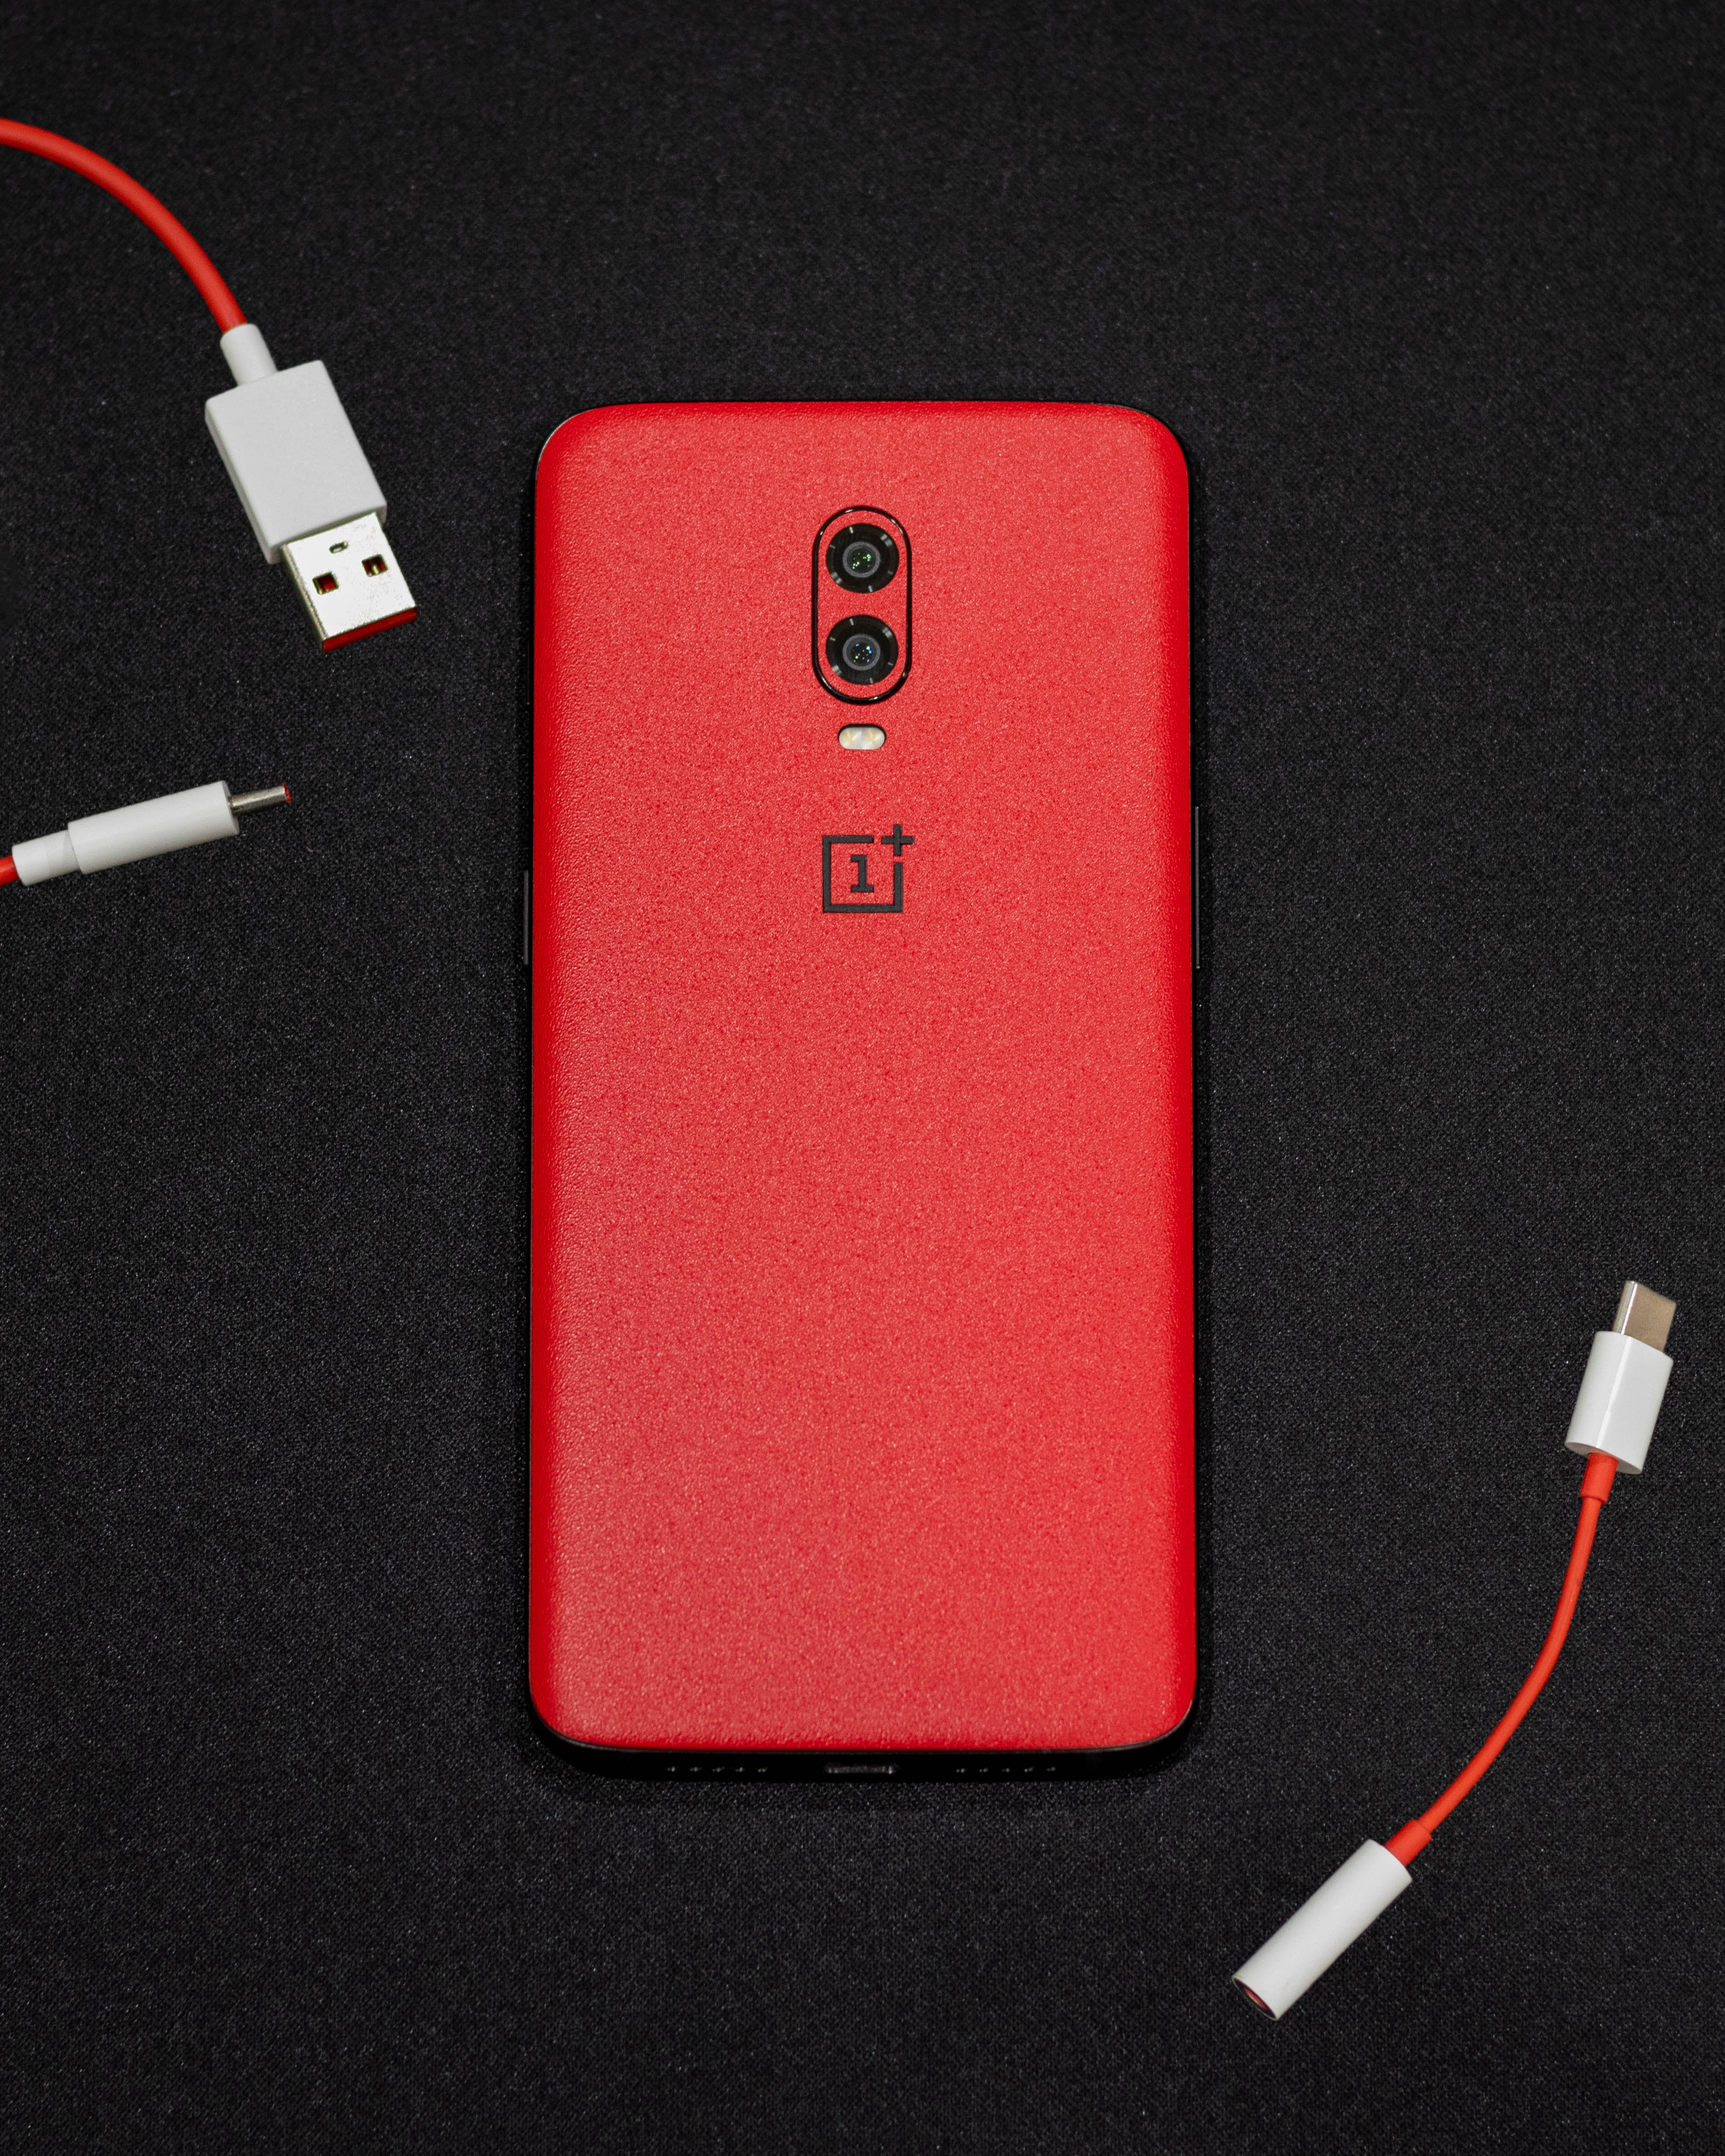 A new OxygenOS Open Beta update released for OnePlus 6/6T